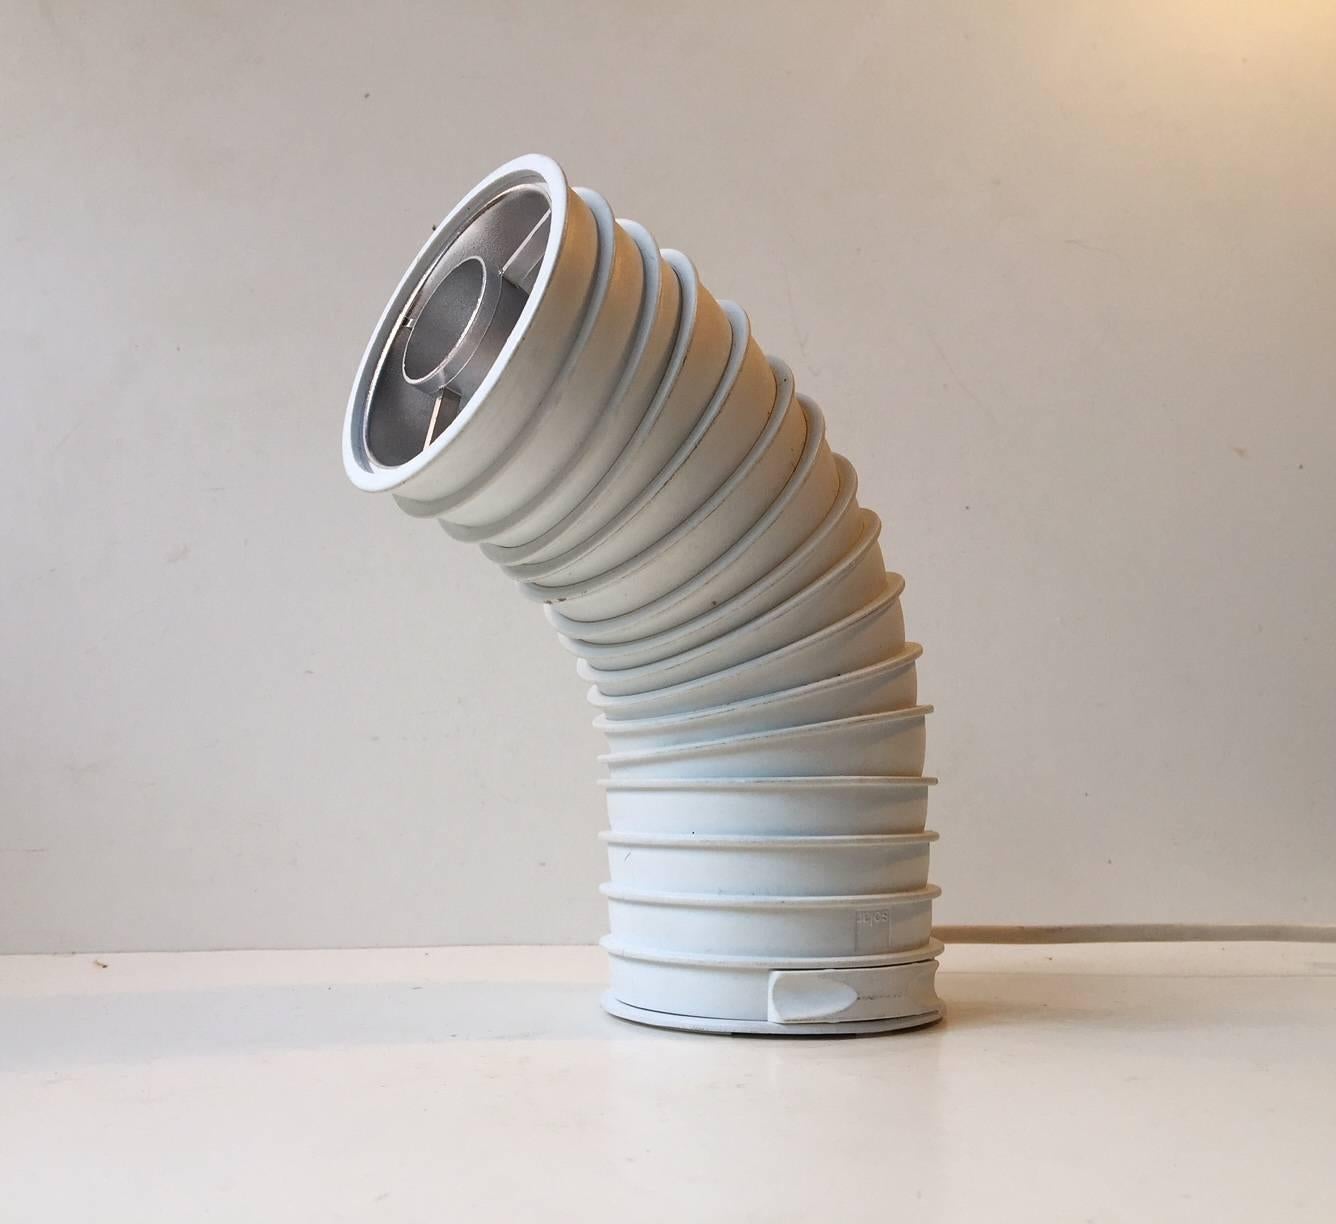 - Spage age table light
- Shaped like a worm or caterpillar or industrial pipe
- Designed by Danish architect Ole Pless-Jørgensen
- Manufactured by Nordisk Solar in Denmark in the 1980s
- Features a hidden switch on the bottom
- Halogen light